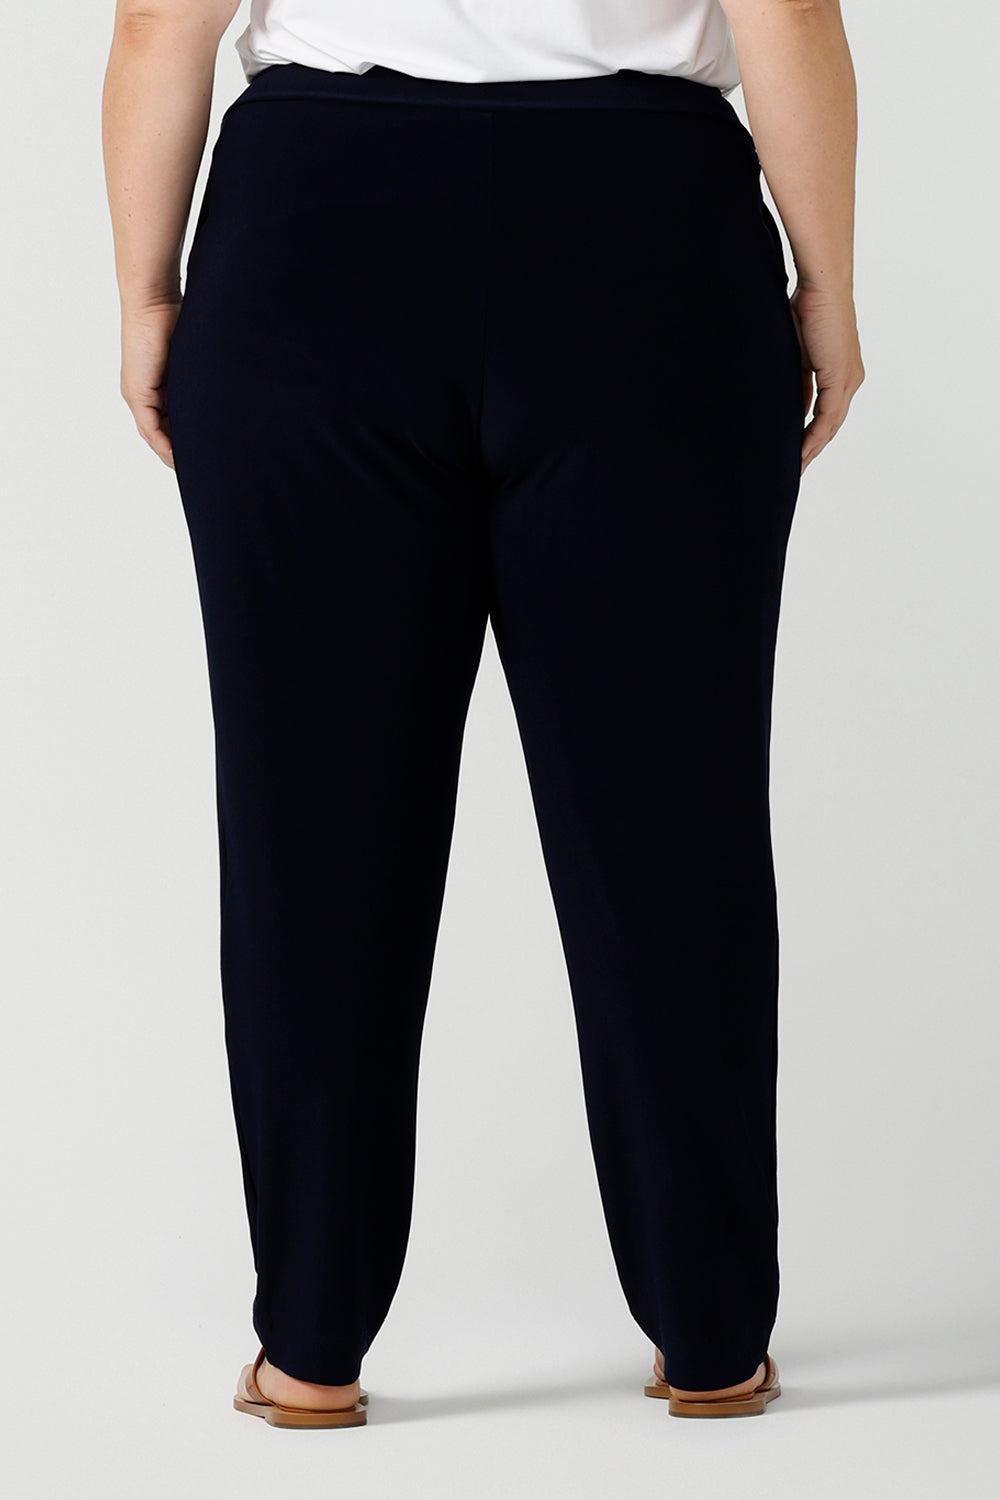 Close up back view of curvy size 18 woman wears jersey work pants in navy. Styled back with a white bamboo v-neck top. Comfortable corporate pants for women. Designed and made in Australia for Australian womenswear label Leina & Fleur. Inclusive size range 8 - 24.